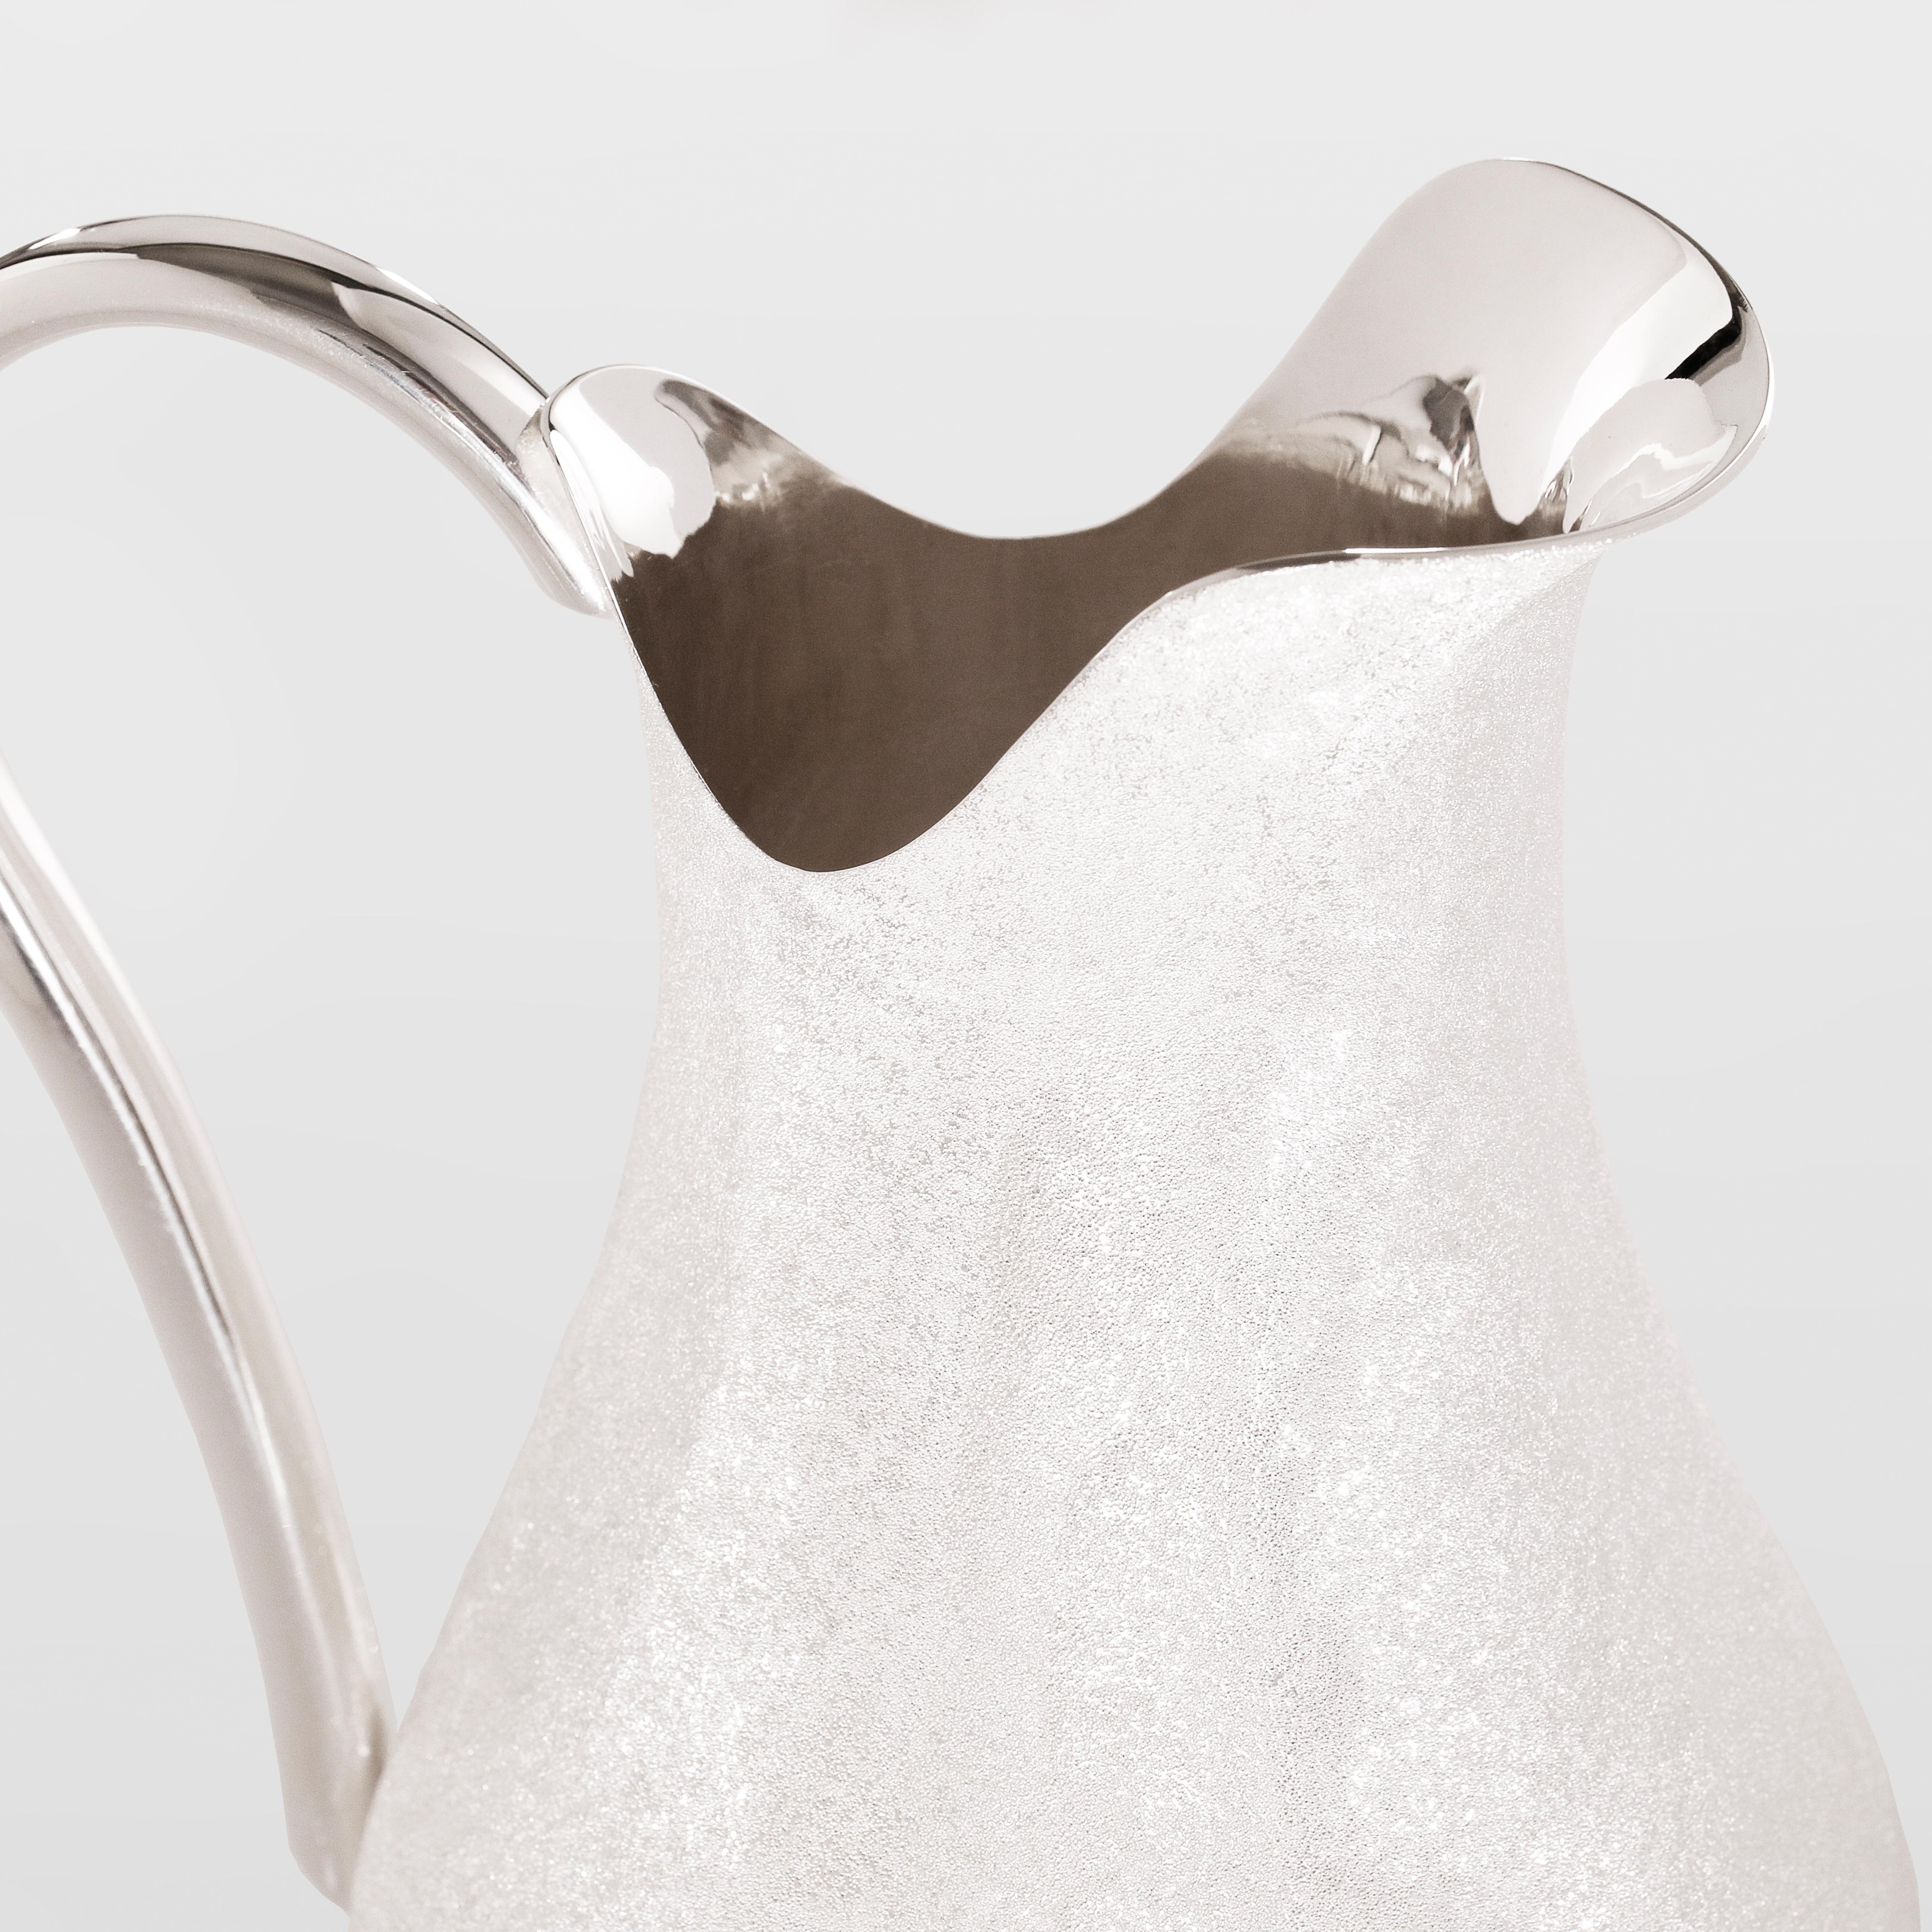 K-over Pitcher Stardust
The Stardust Pitcher is part of our new collection, completely made of solid 999% sterling silver will make your daily table very elegant and will be perfect for special occasions.
The special diamond finish makes it sparkle